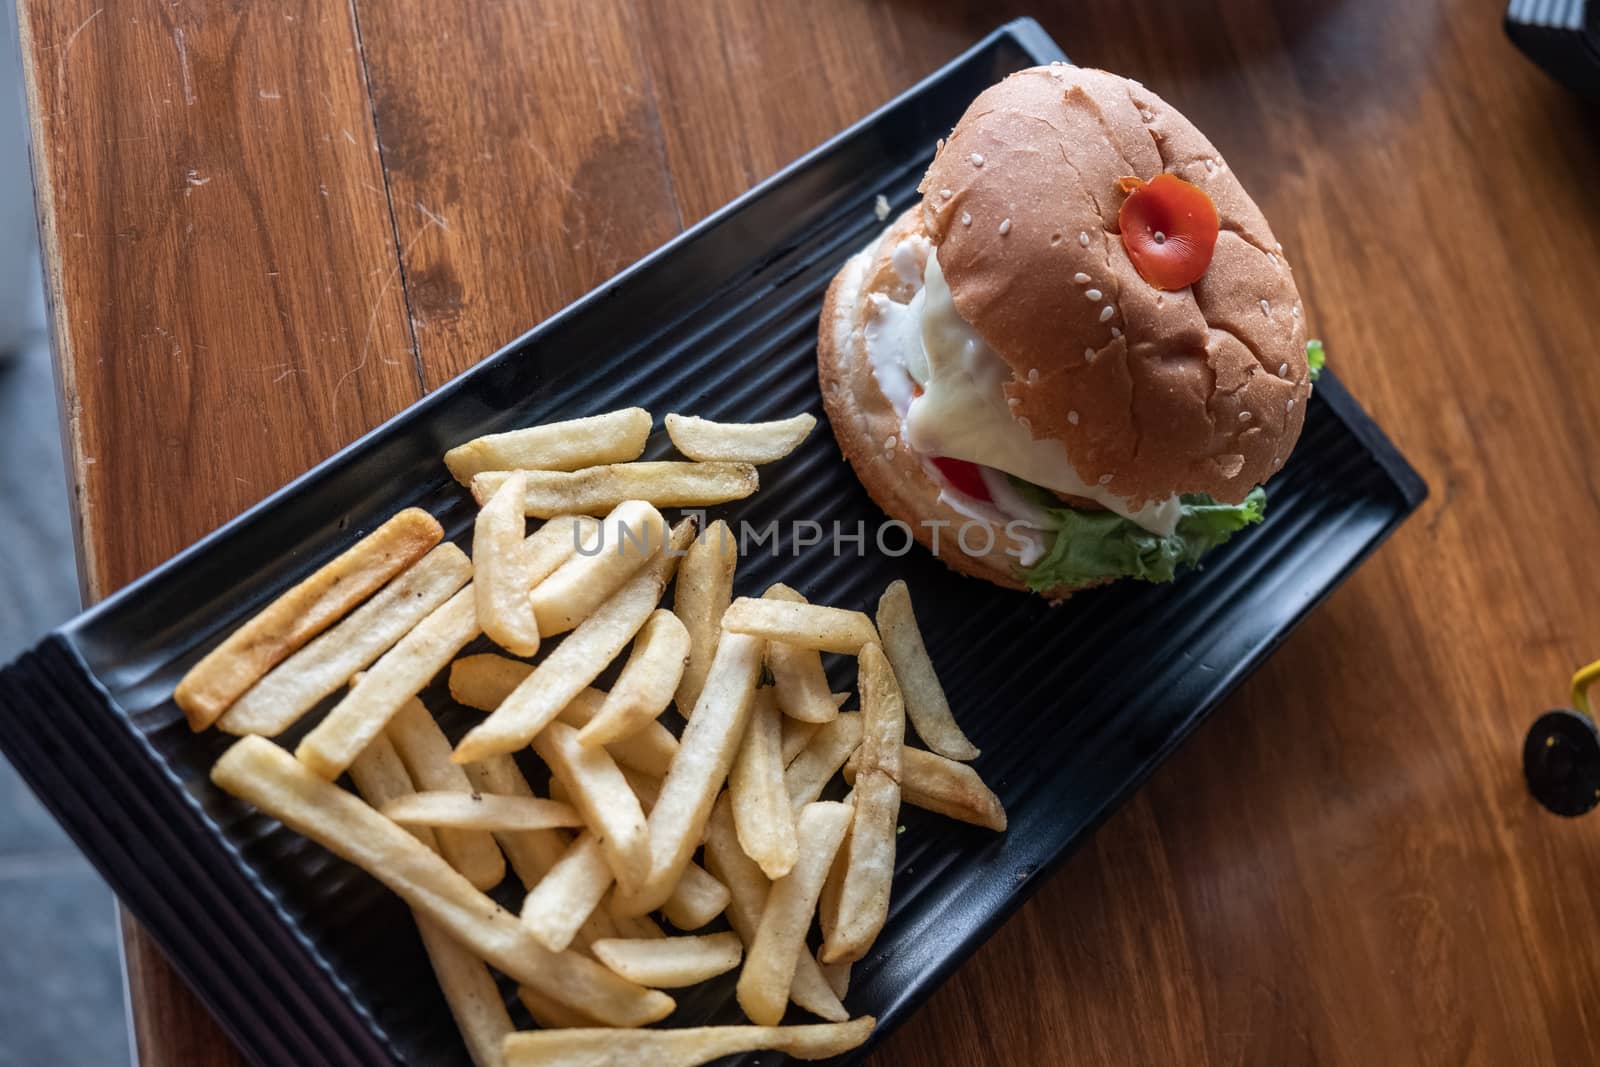 Tasty hamburger with french fries on wooden table